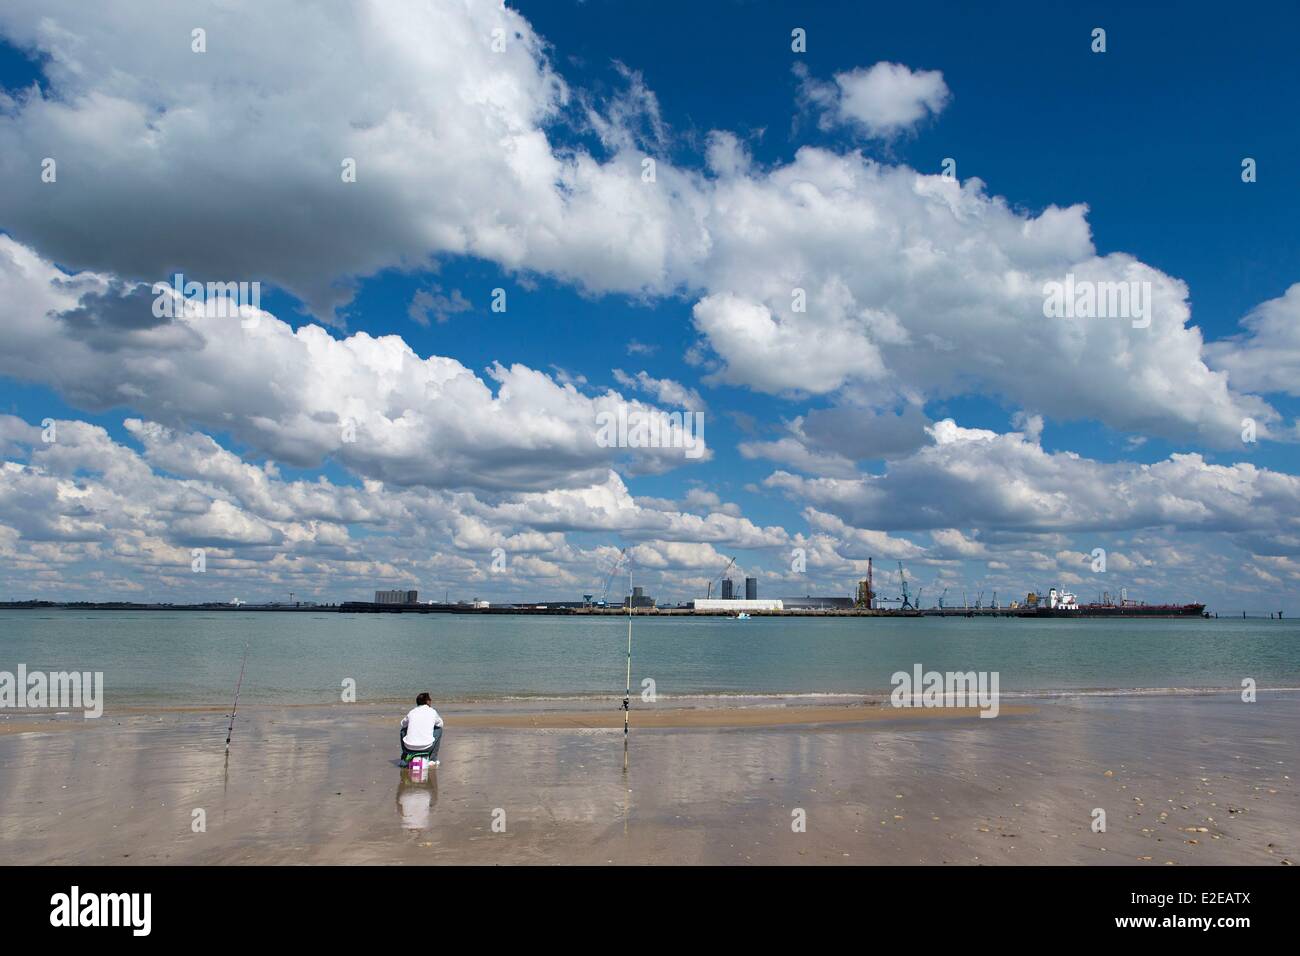 France, Charente Maritime, Ile de Re, Rivedoux Plage, fisherman on the beach facing the Grand Port Maritime de La Rochelle (La Rochelle commercial deep water port) Stock Photo